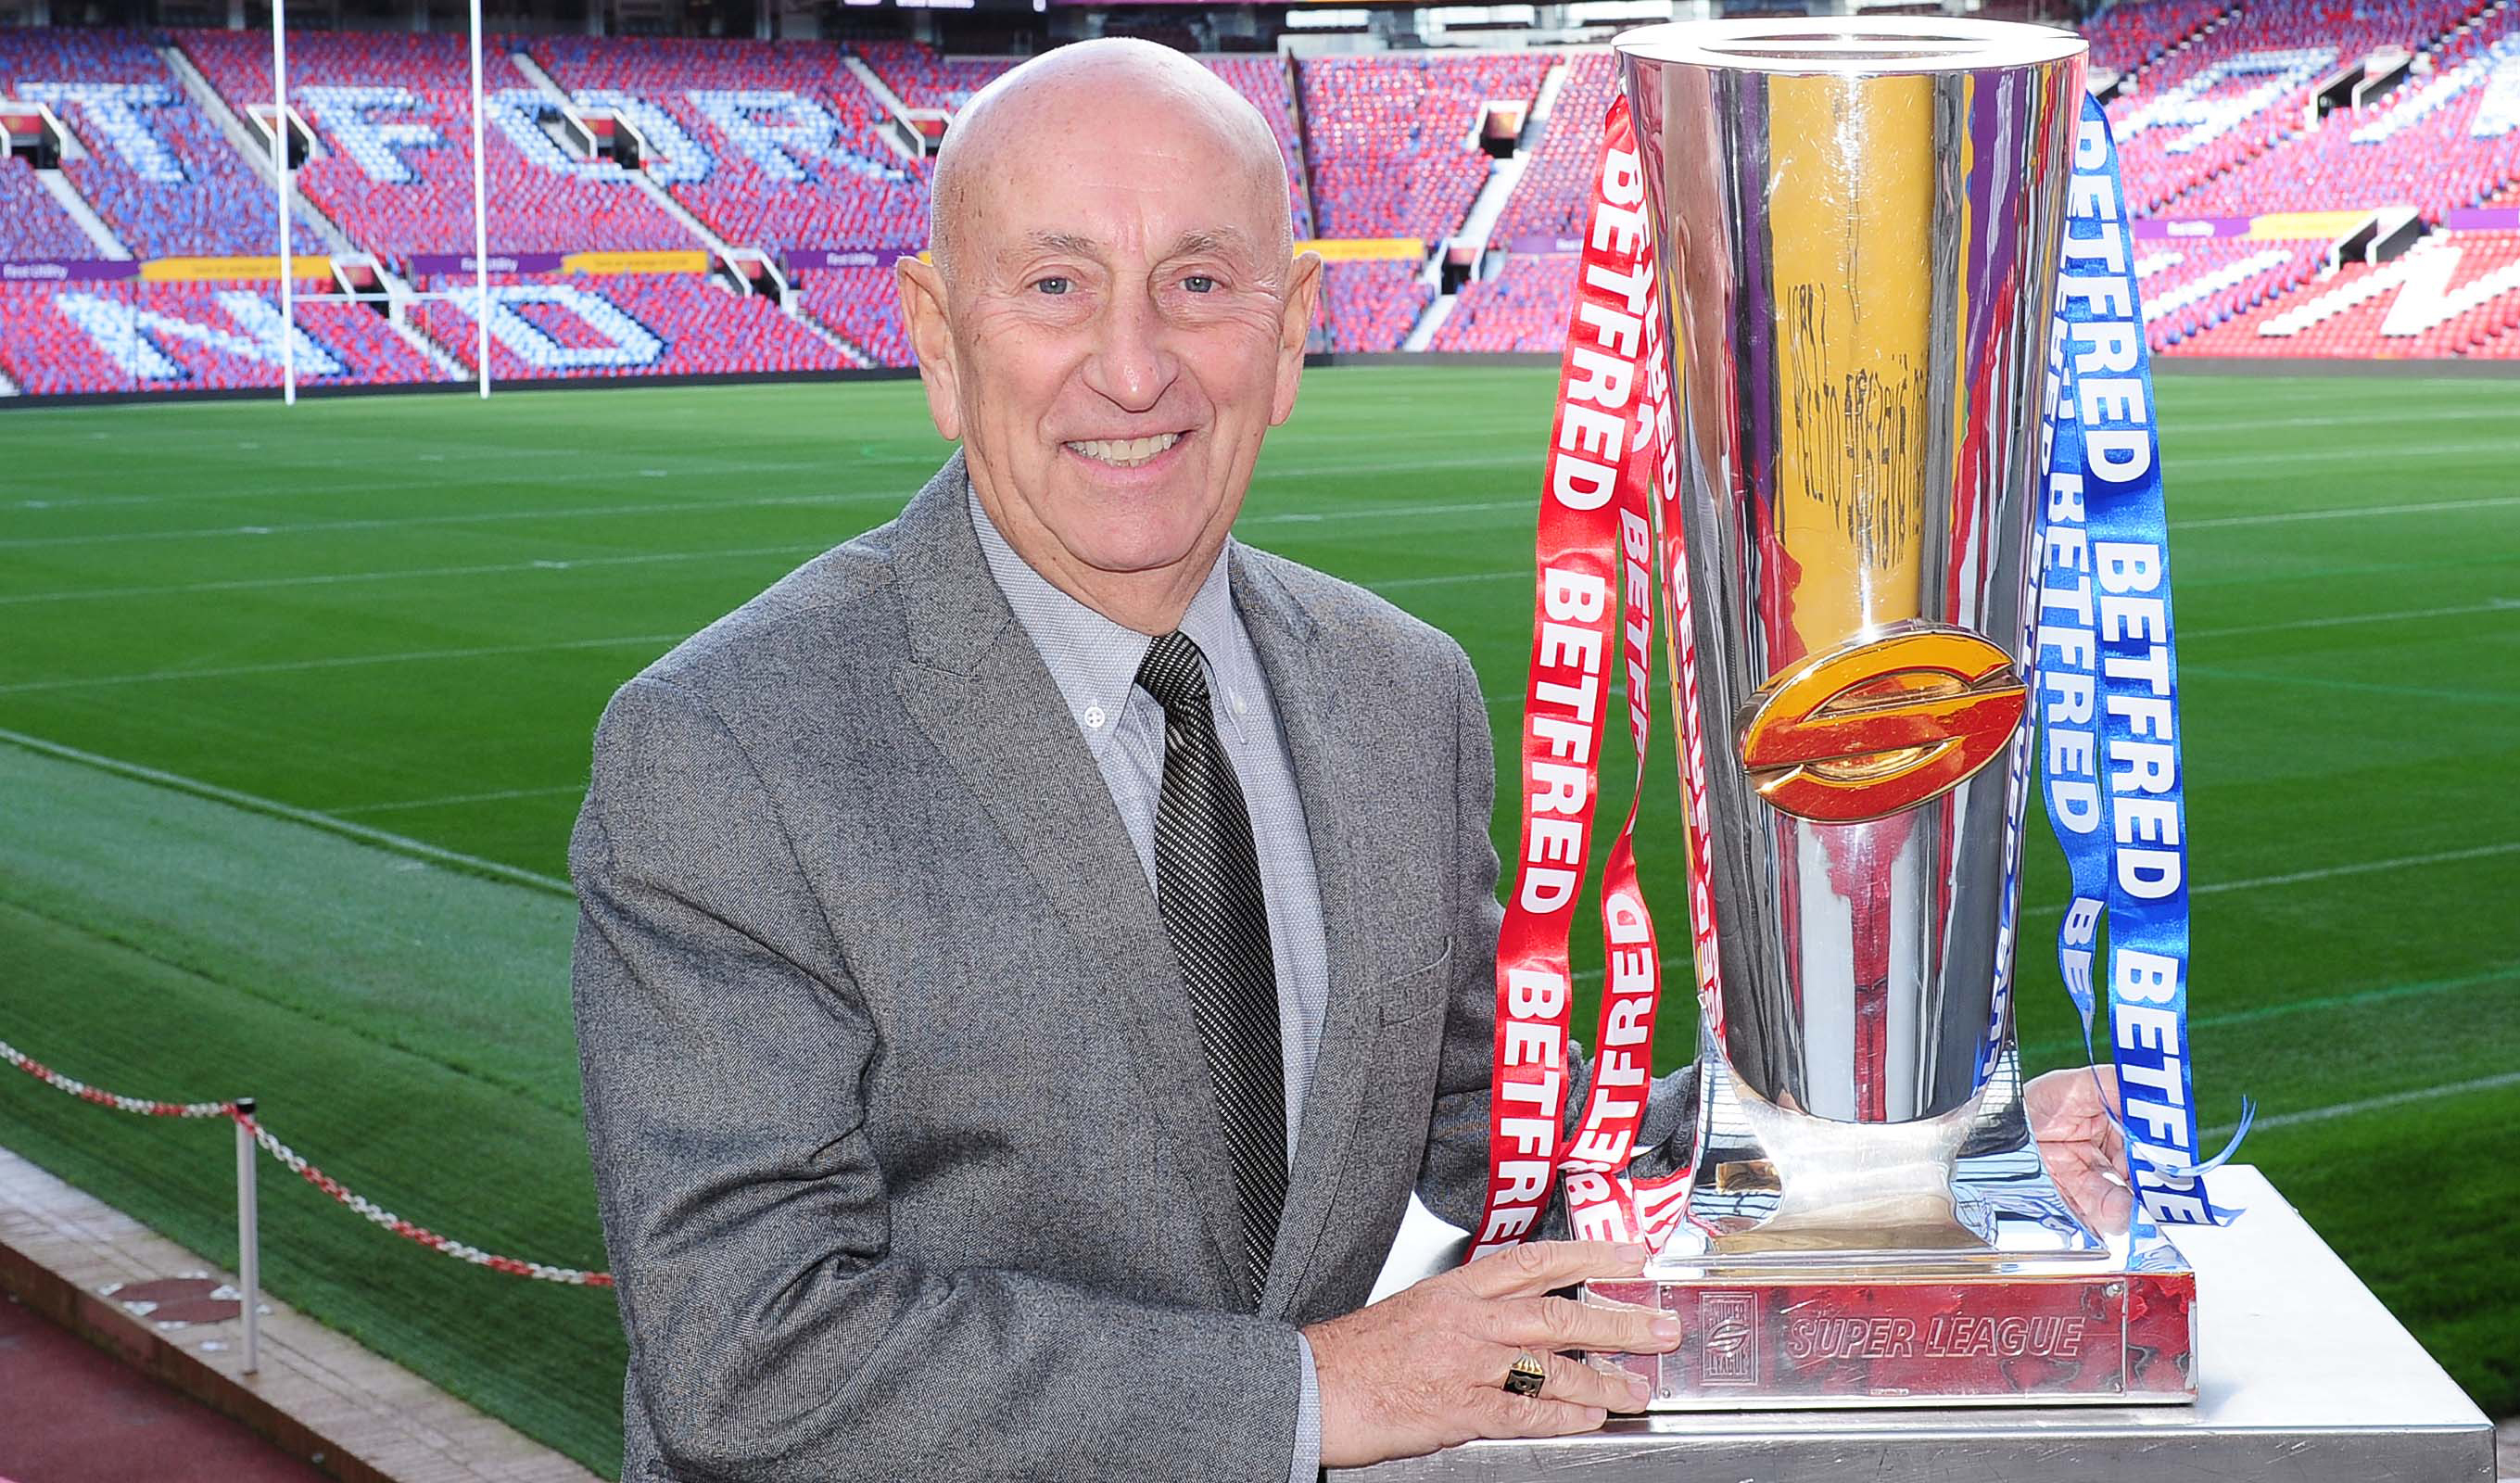 Bookmaker Fred Done with the Super League trophy